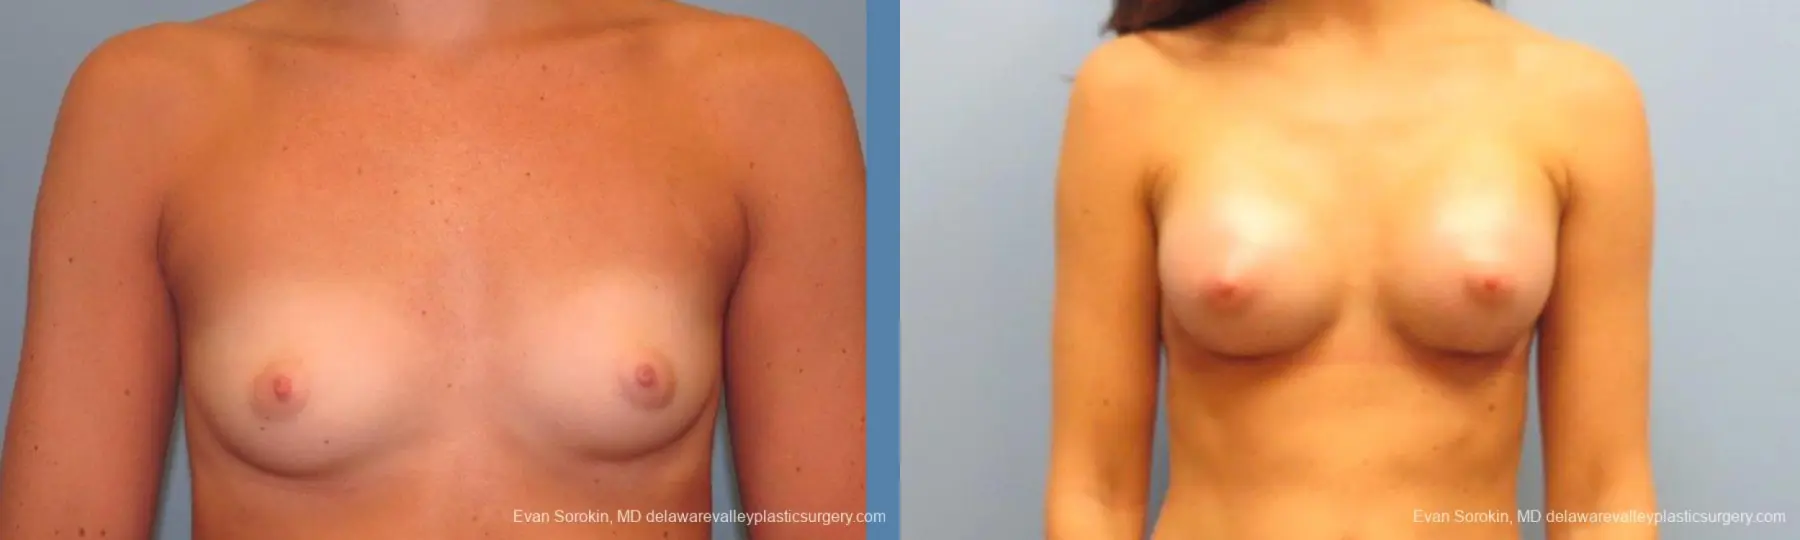 Philadelphia Breast Augmentation 9621 - Before and After 1